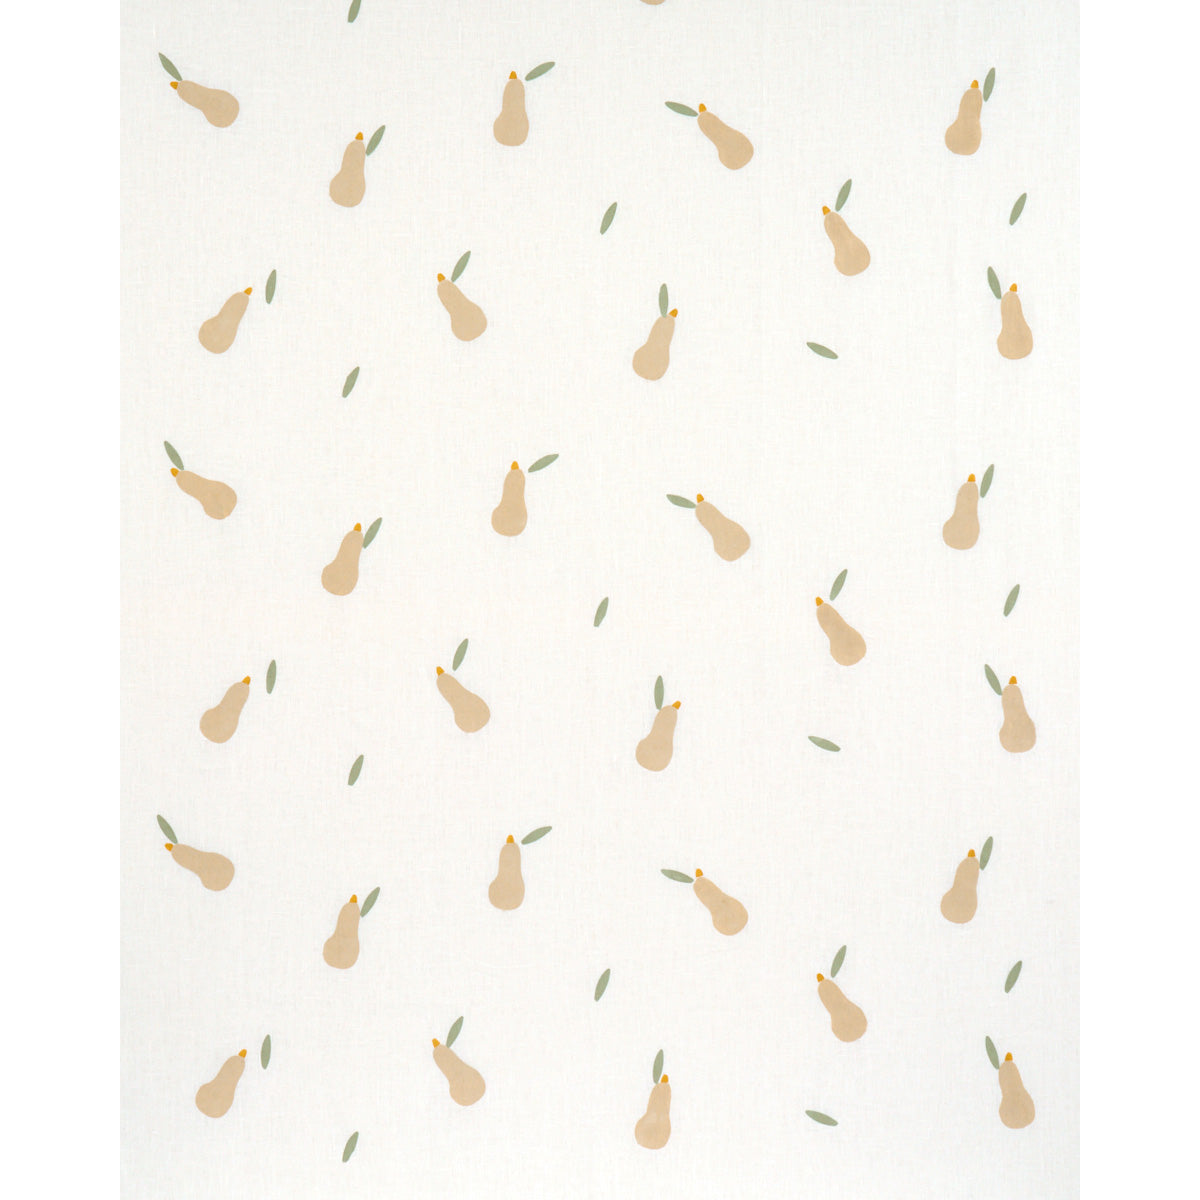 PEARS HAND BLOCK PRINT | BUFF AND SAGE ON WHITE